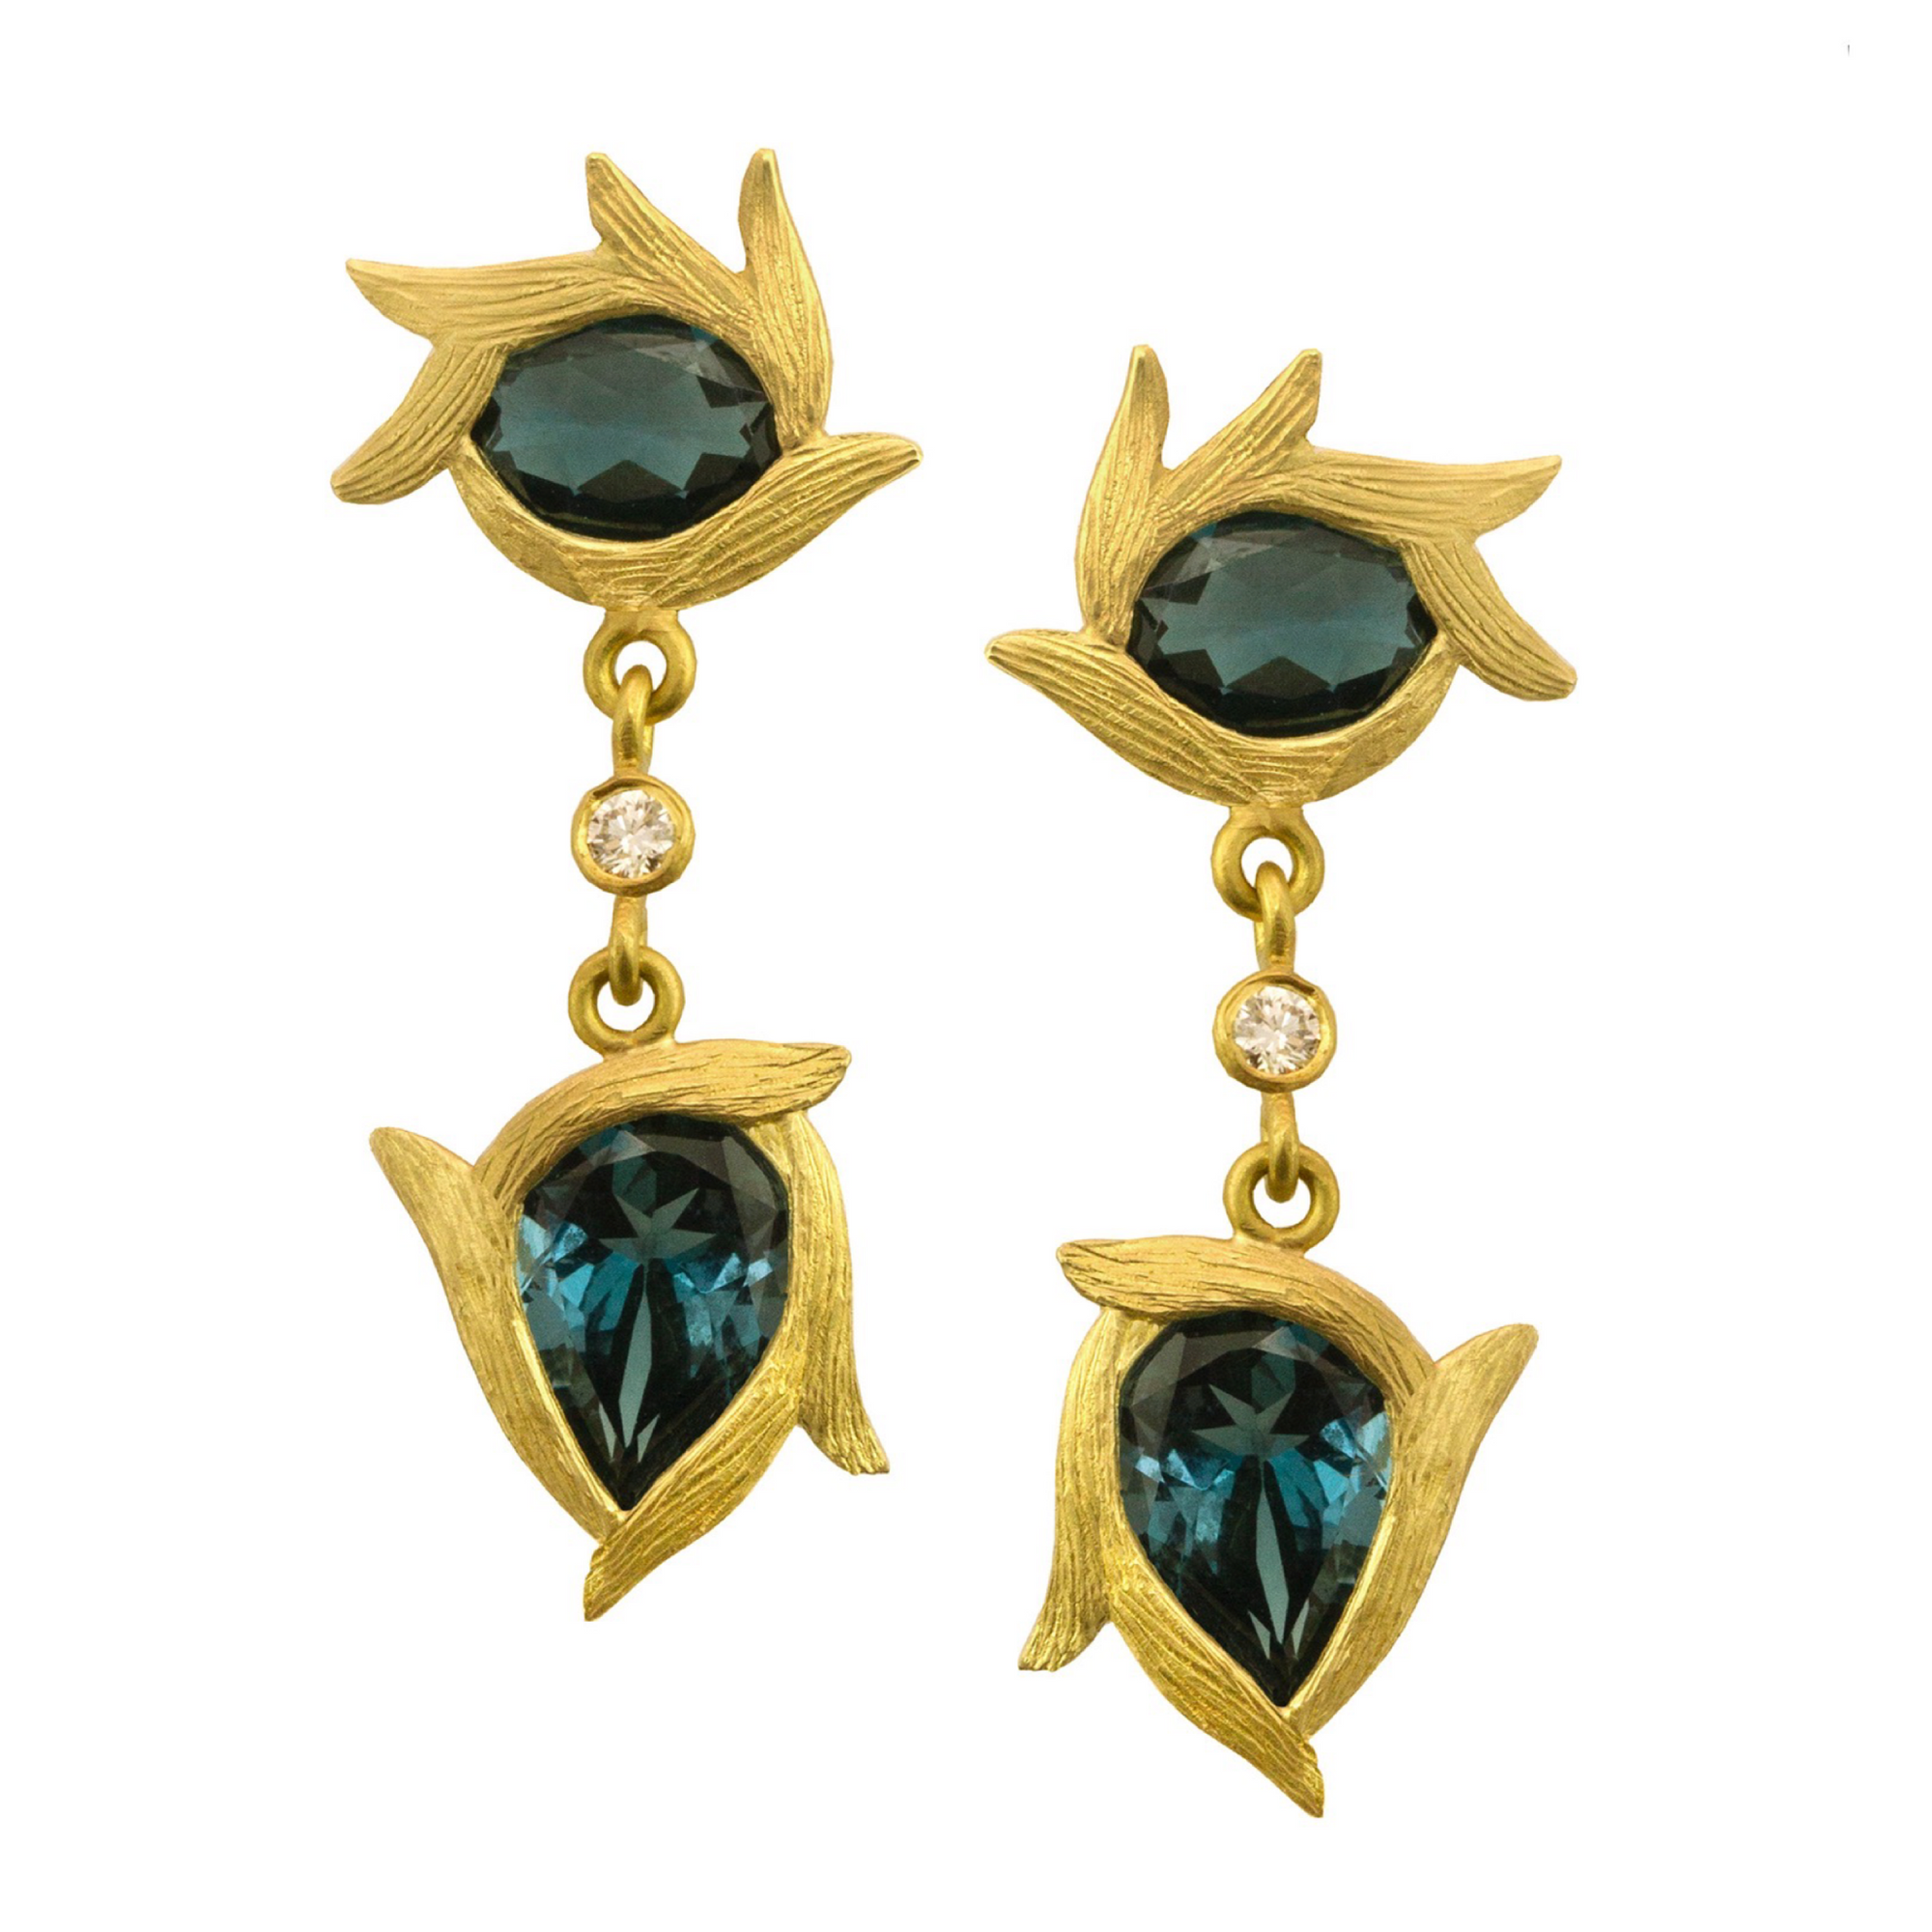 London Blue Topaz Vine Double Drop Earrings Laurie Kaiser available at Talisman Collection Fine Jewelers in El Dorado Hills, CA and online. The London Blue Topaz Vine Double Drop Earrings feature deeply colored London blue topaz stones set in 18k yellow gold and are accented with .06 cts of white diamonds. With an artistic interpretation of nature, these earrings are a fun and elegant look.